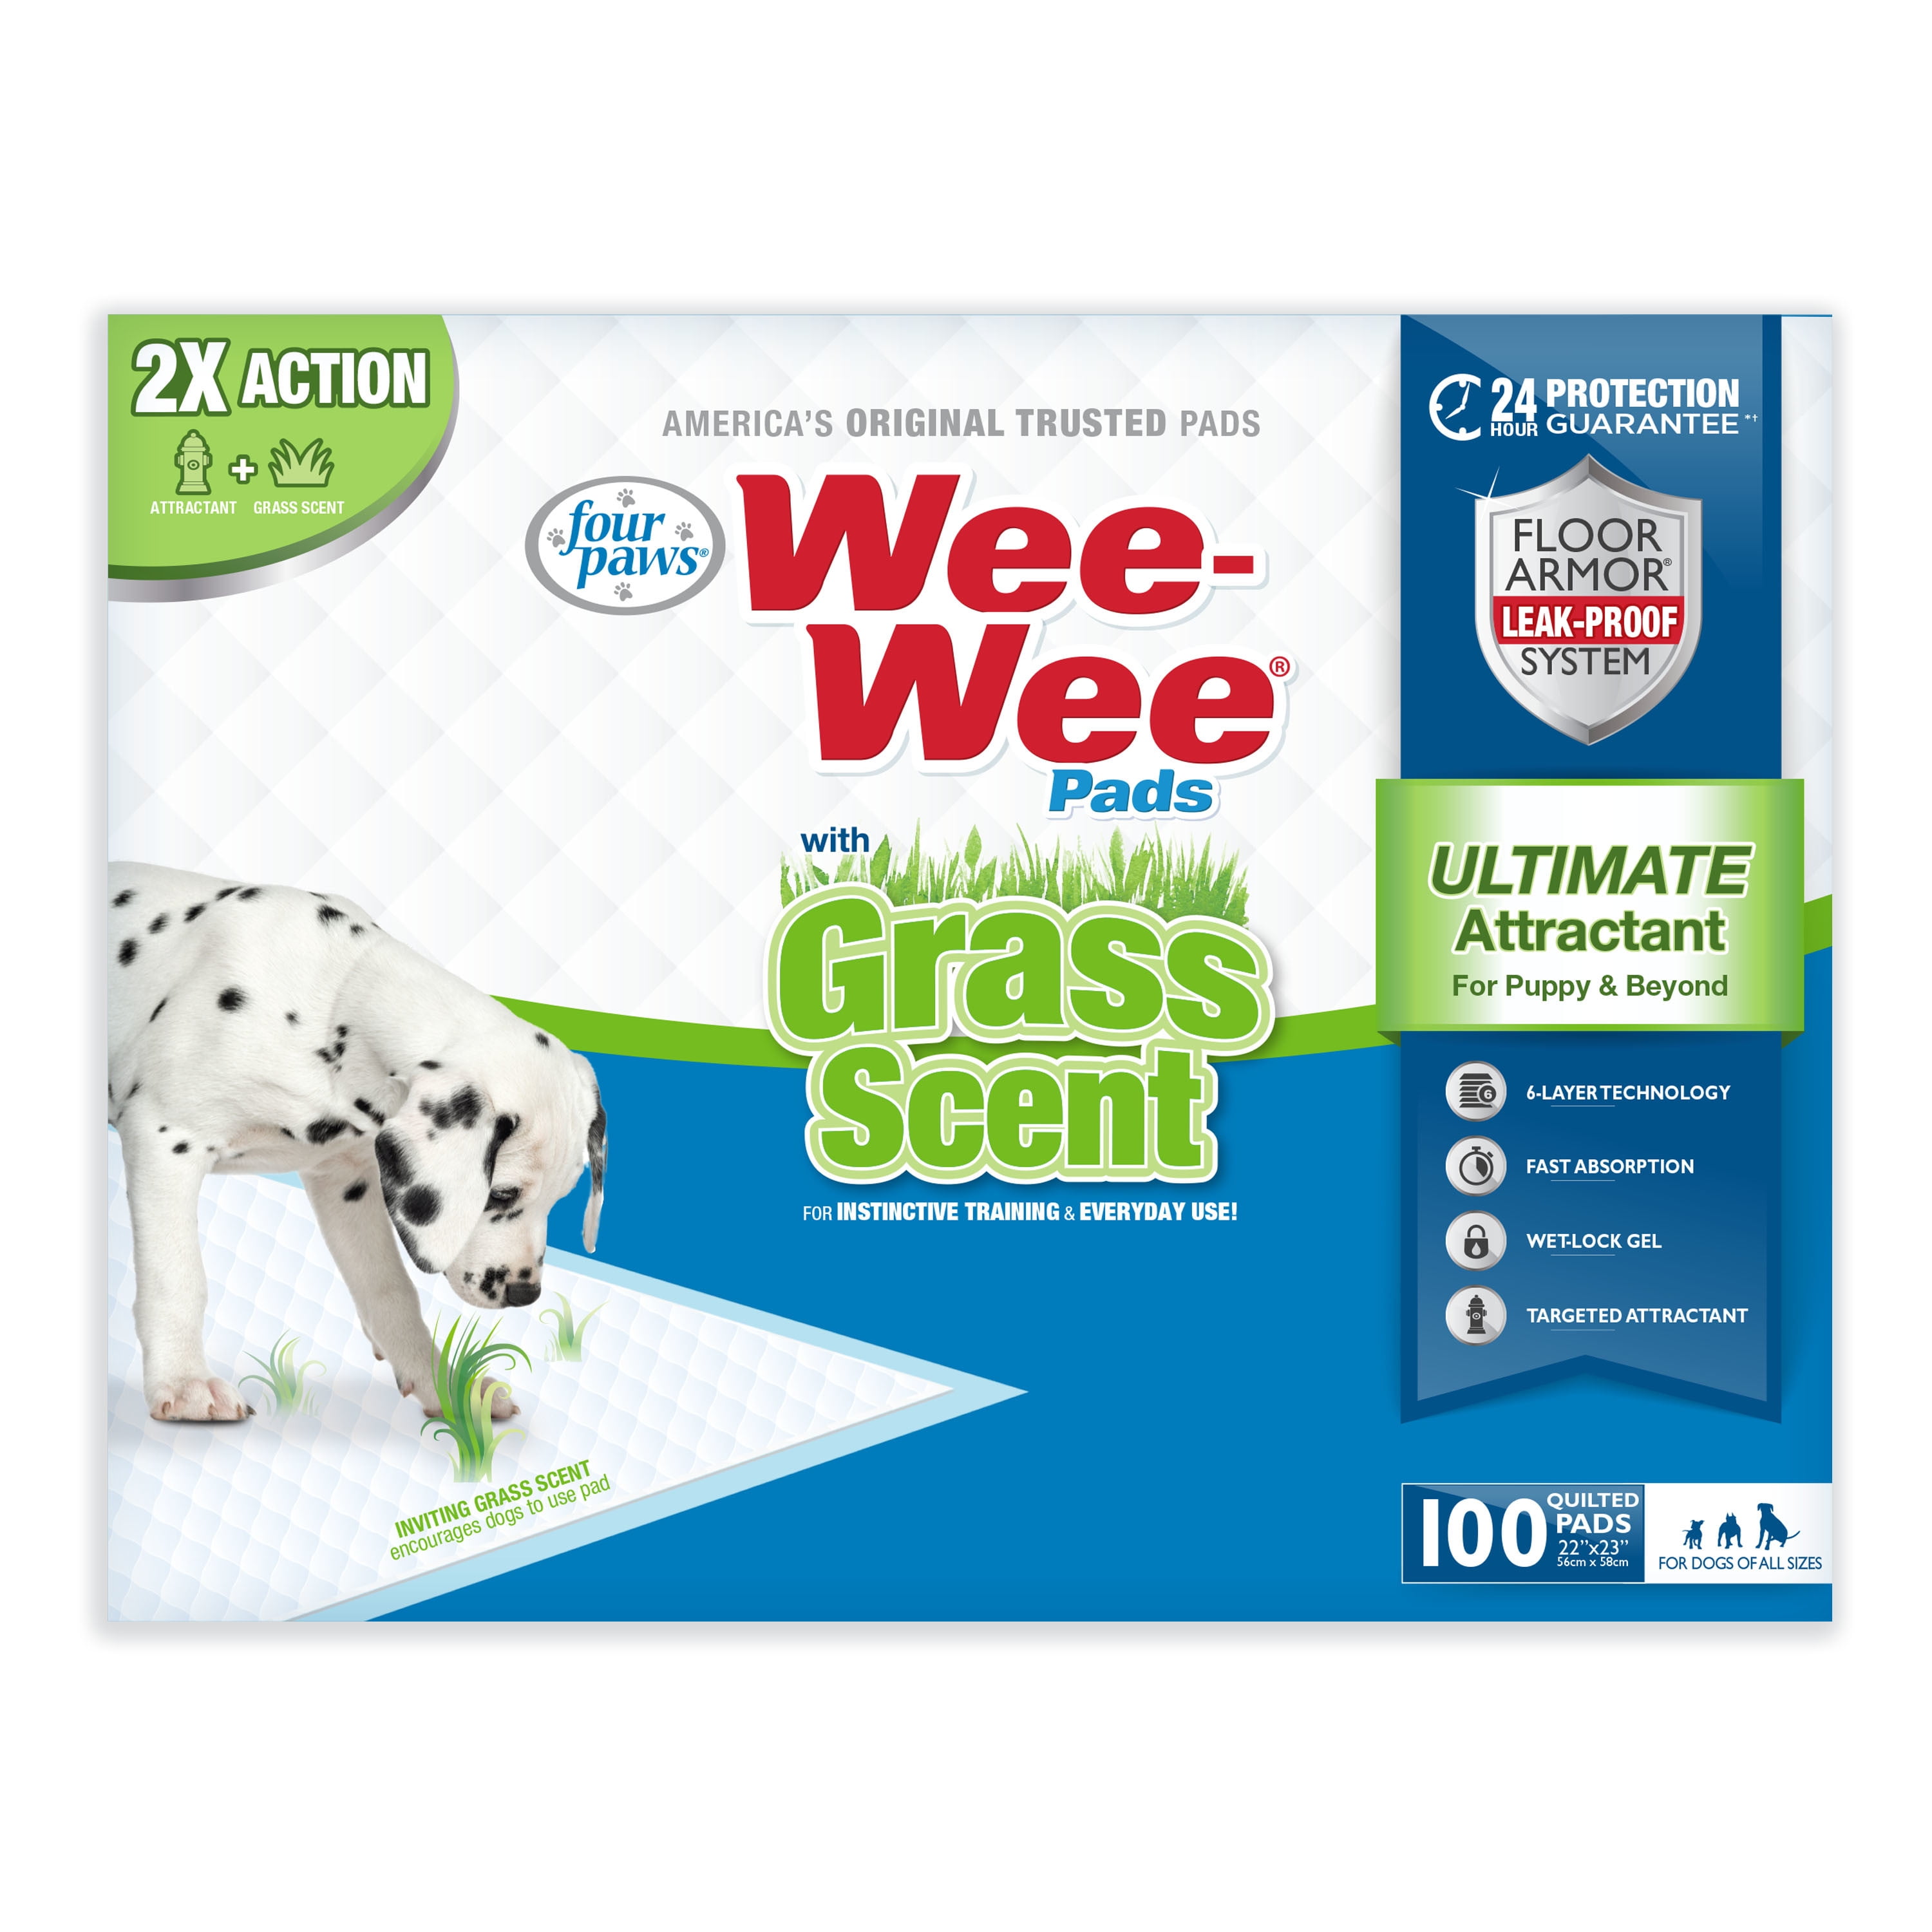 Four Paws X-Large Wee Wee Pads - 40 Pack